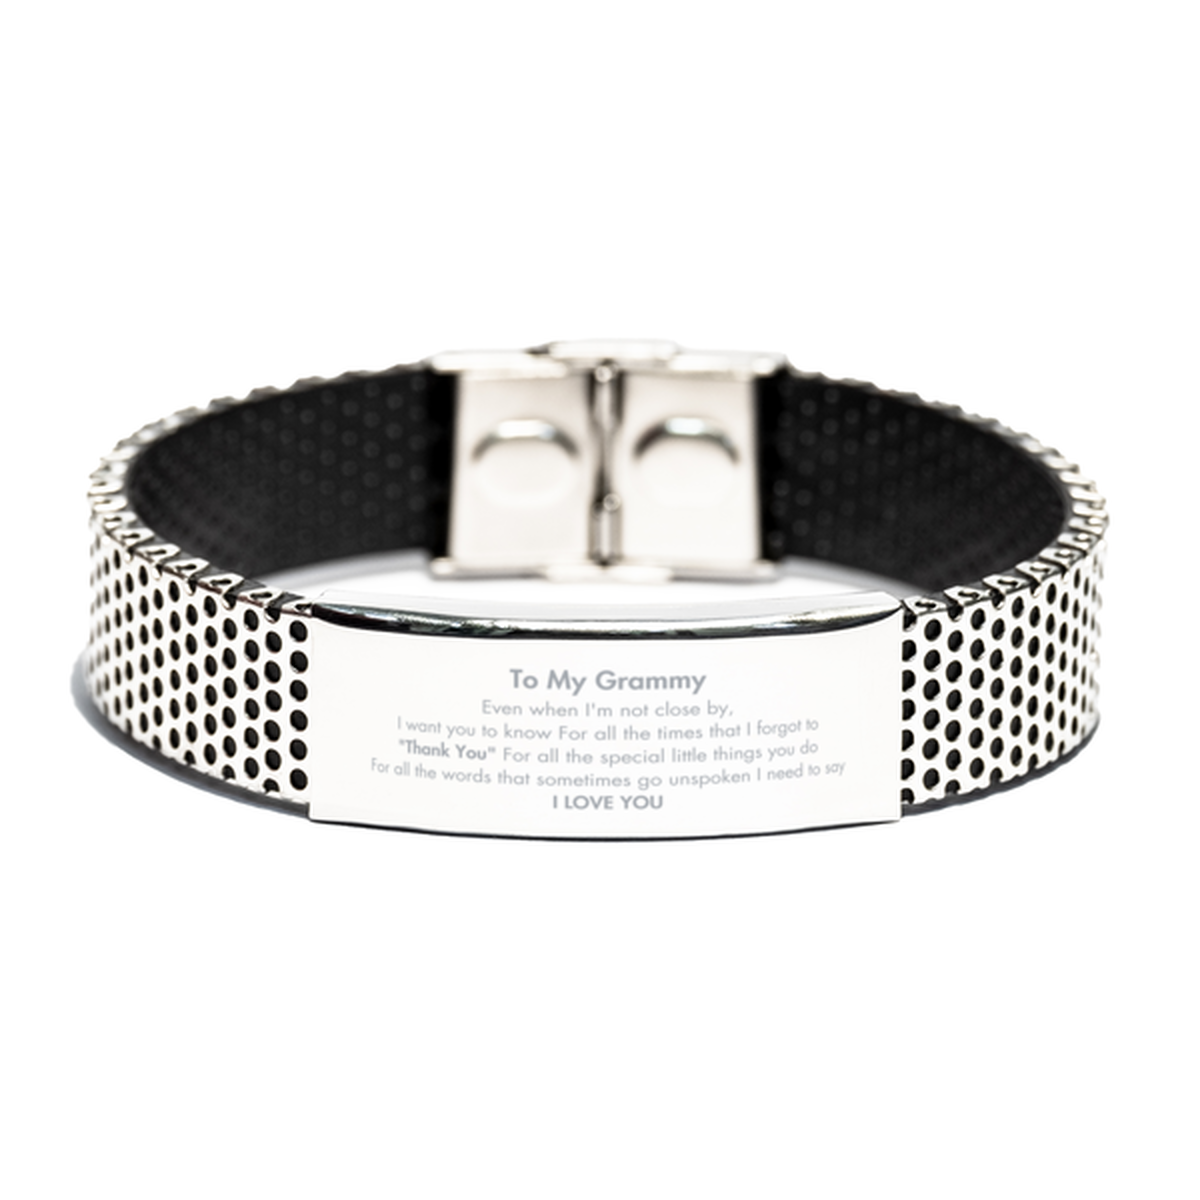 Thank You Gifts for Grammy, Keepsake Stainless Steel Bracelet Gifts for Grammy Birthday Mother's day Father's Day Grammy For all the words That sometimes go unspoken I need to say I LOVE YOU